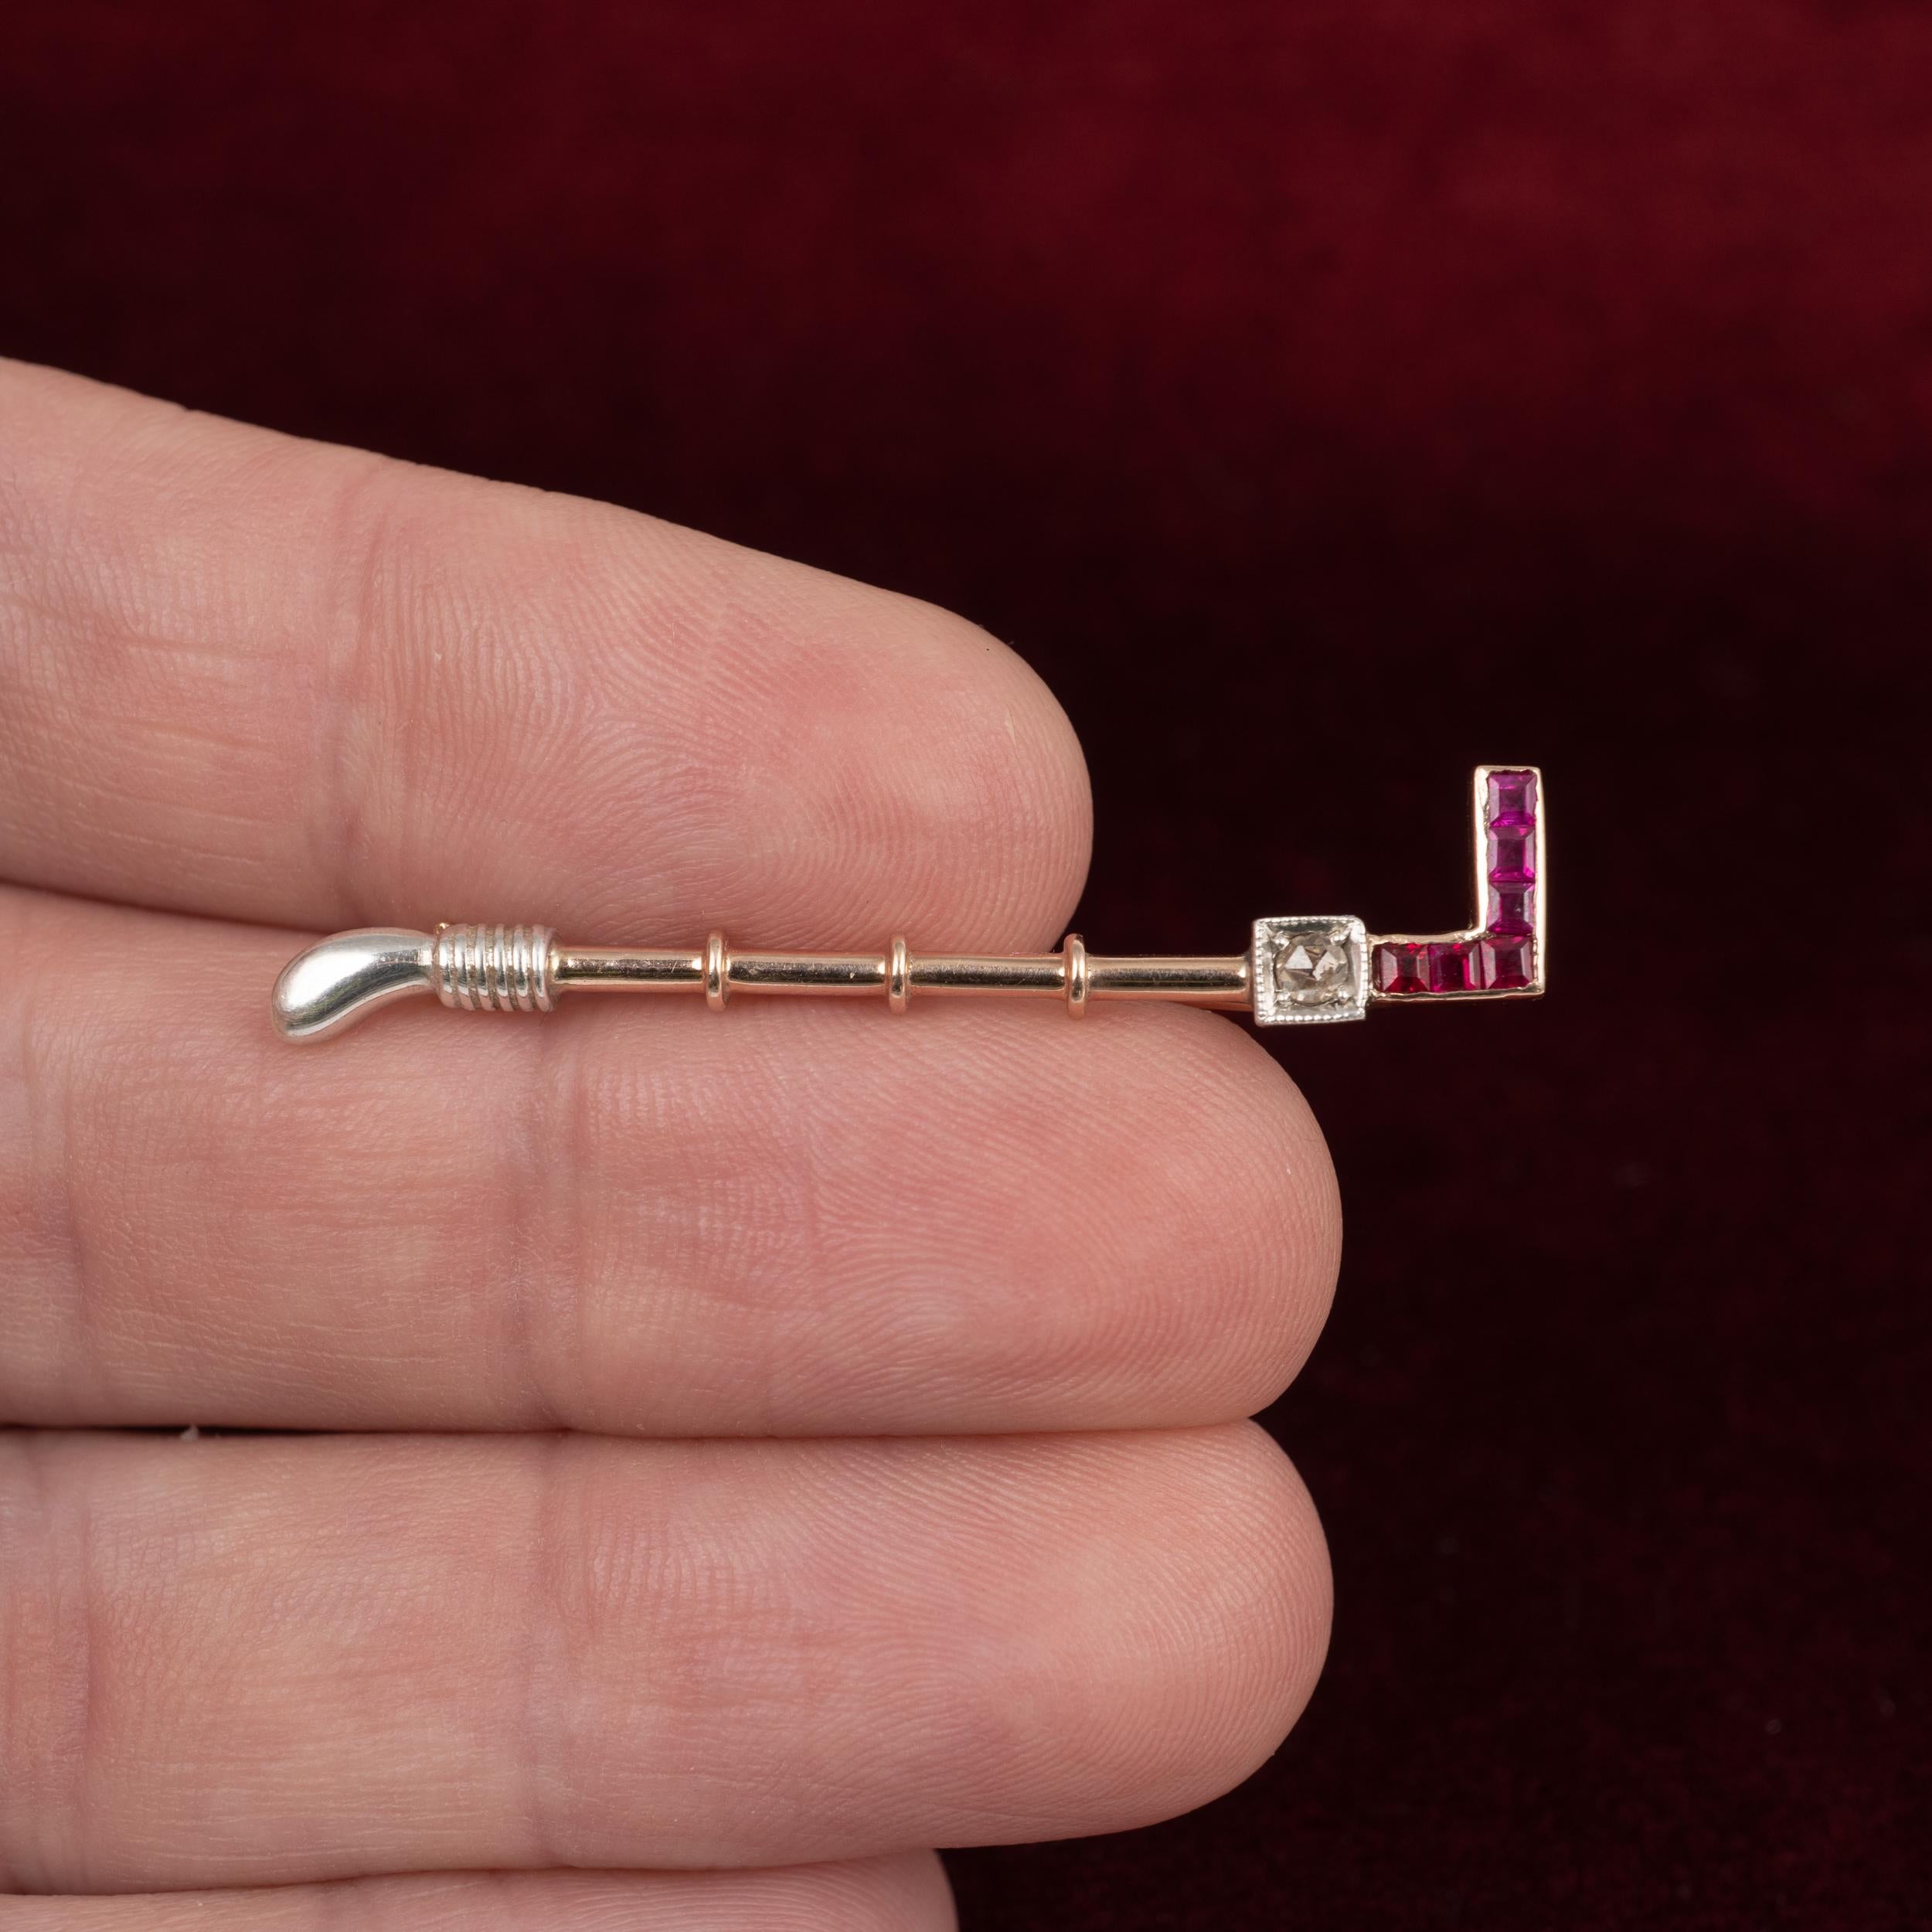 A fabulous Art Deco riding crop brooch set with square-cut rubies and old cut diamond, 18 karat rose gold and platinum, Circa 1920s.

Metal: 18 karat rose gold and platinum. Pin is made in 9 karat gold and stamped as such.
Size: 4.6 cms in